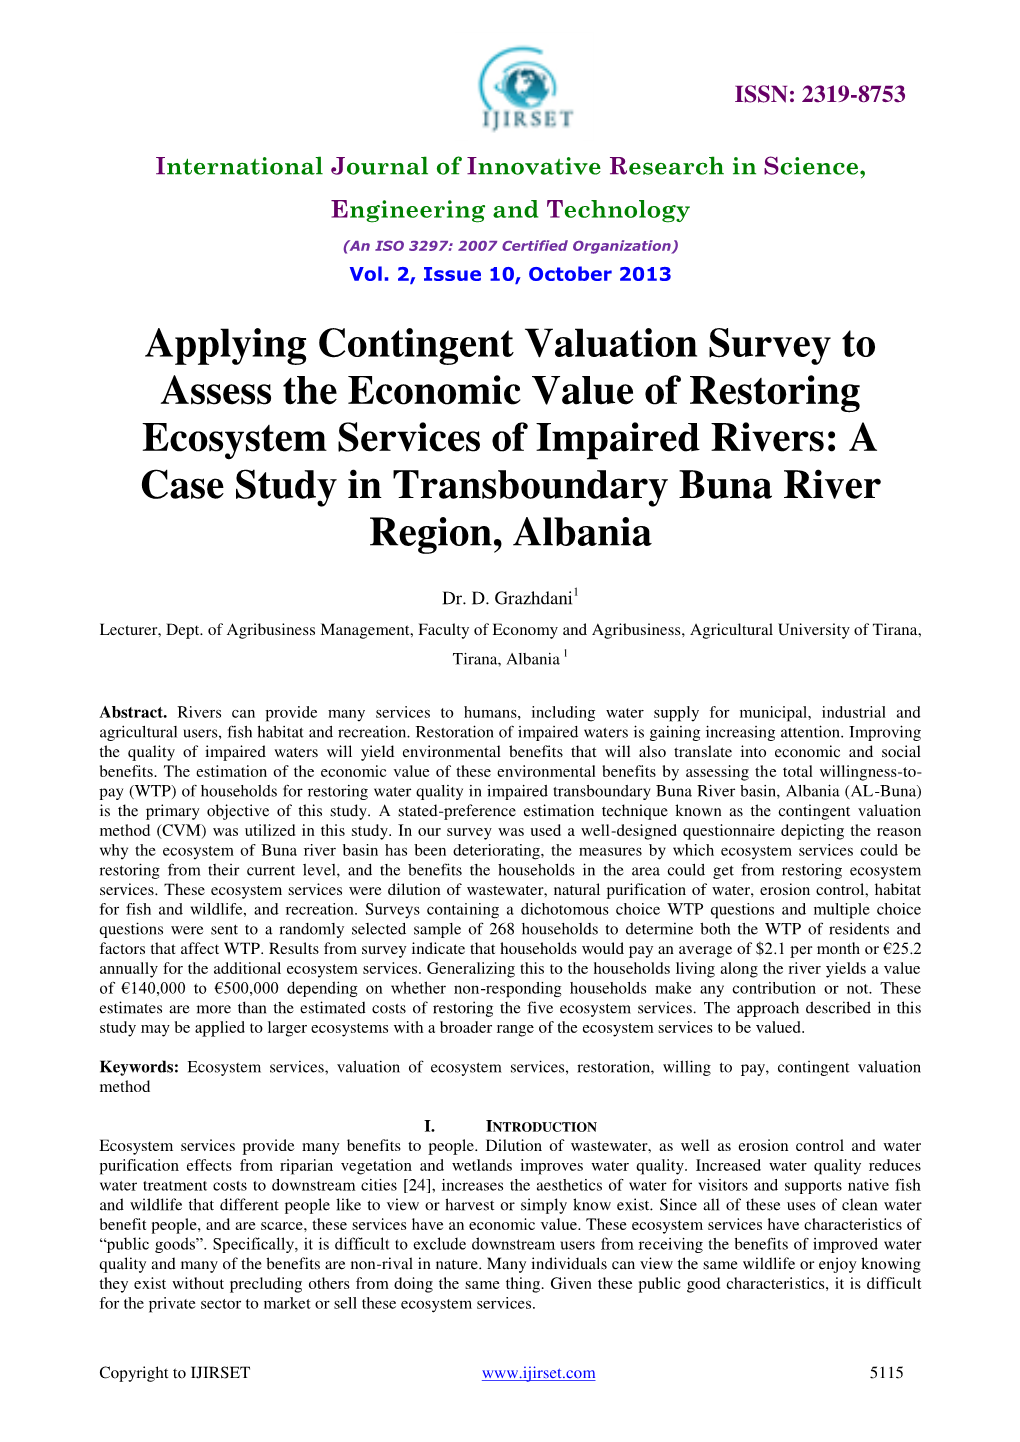 Applying Contingent Valuation Survey to Assess the Economic Value Of